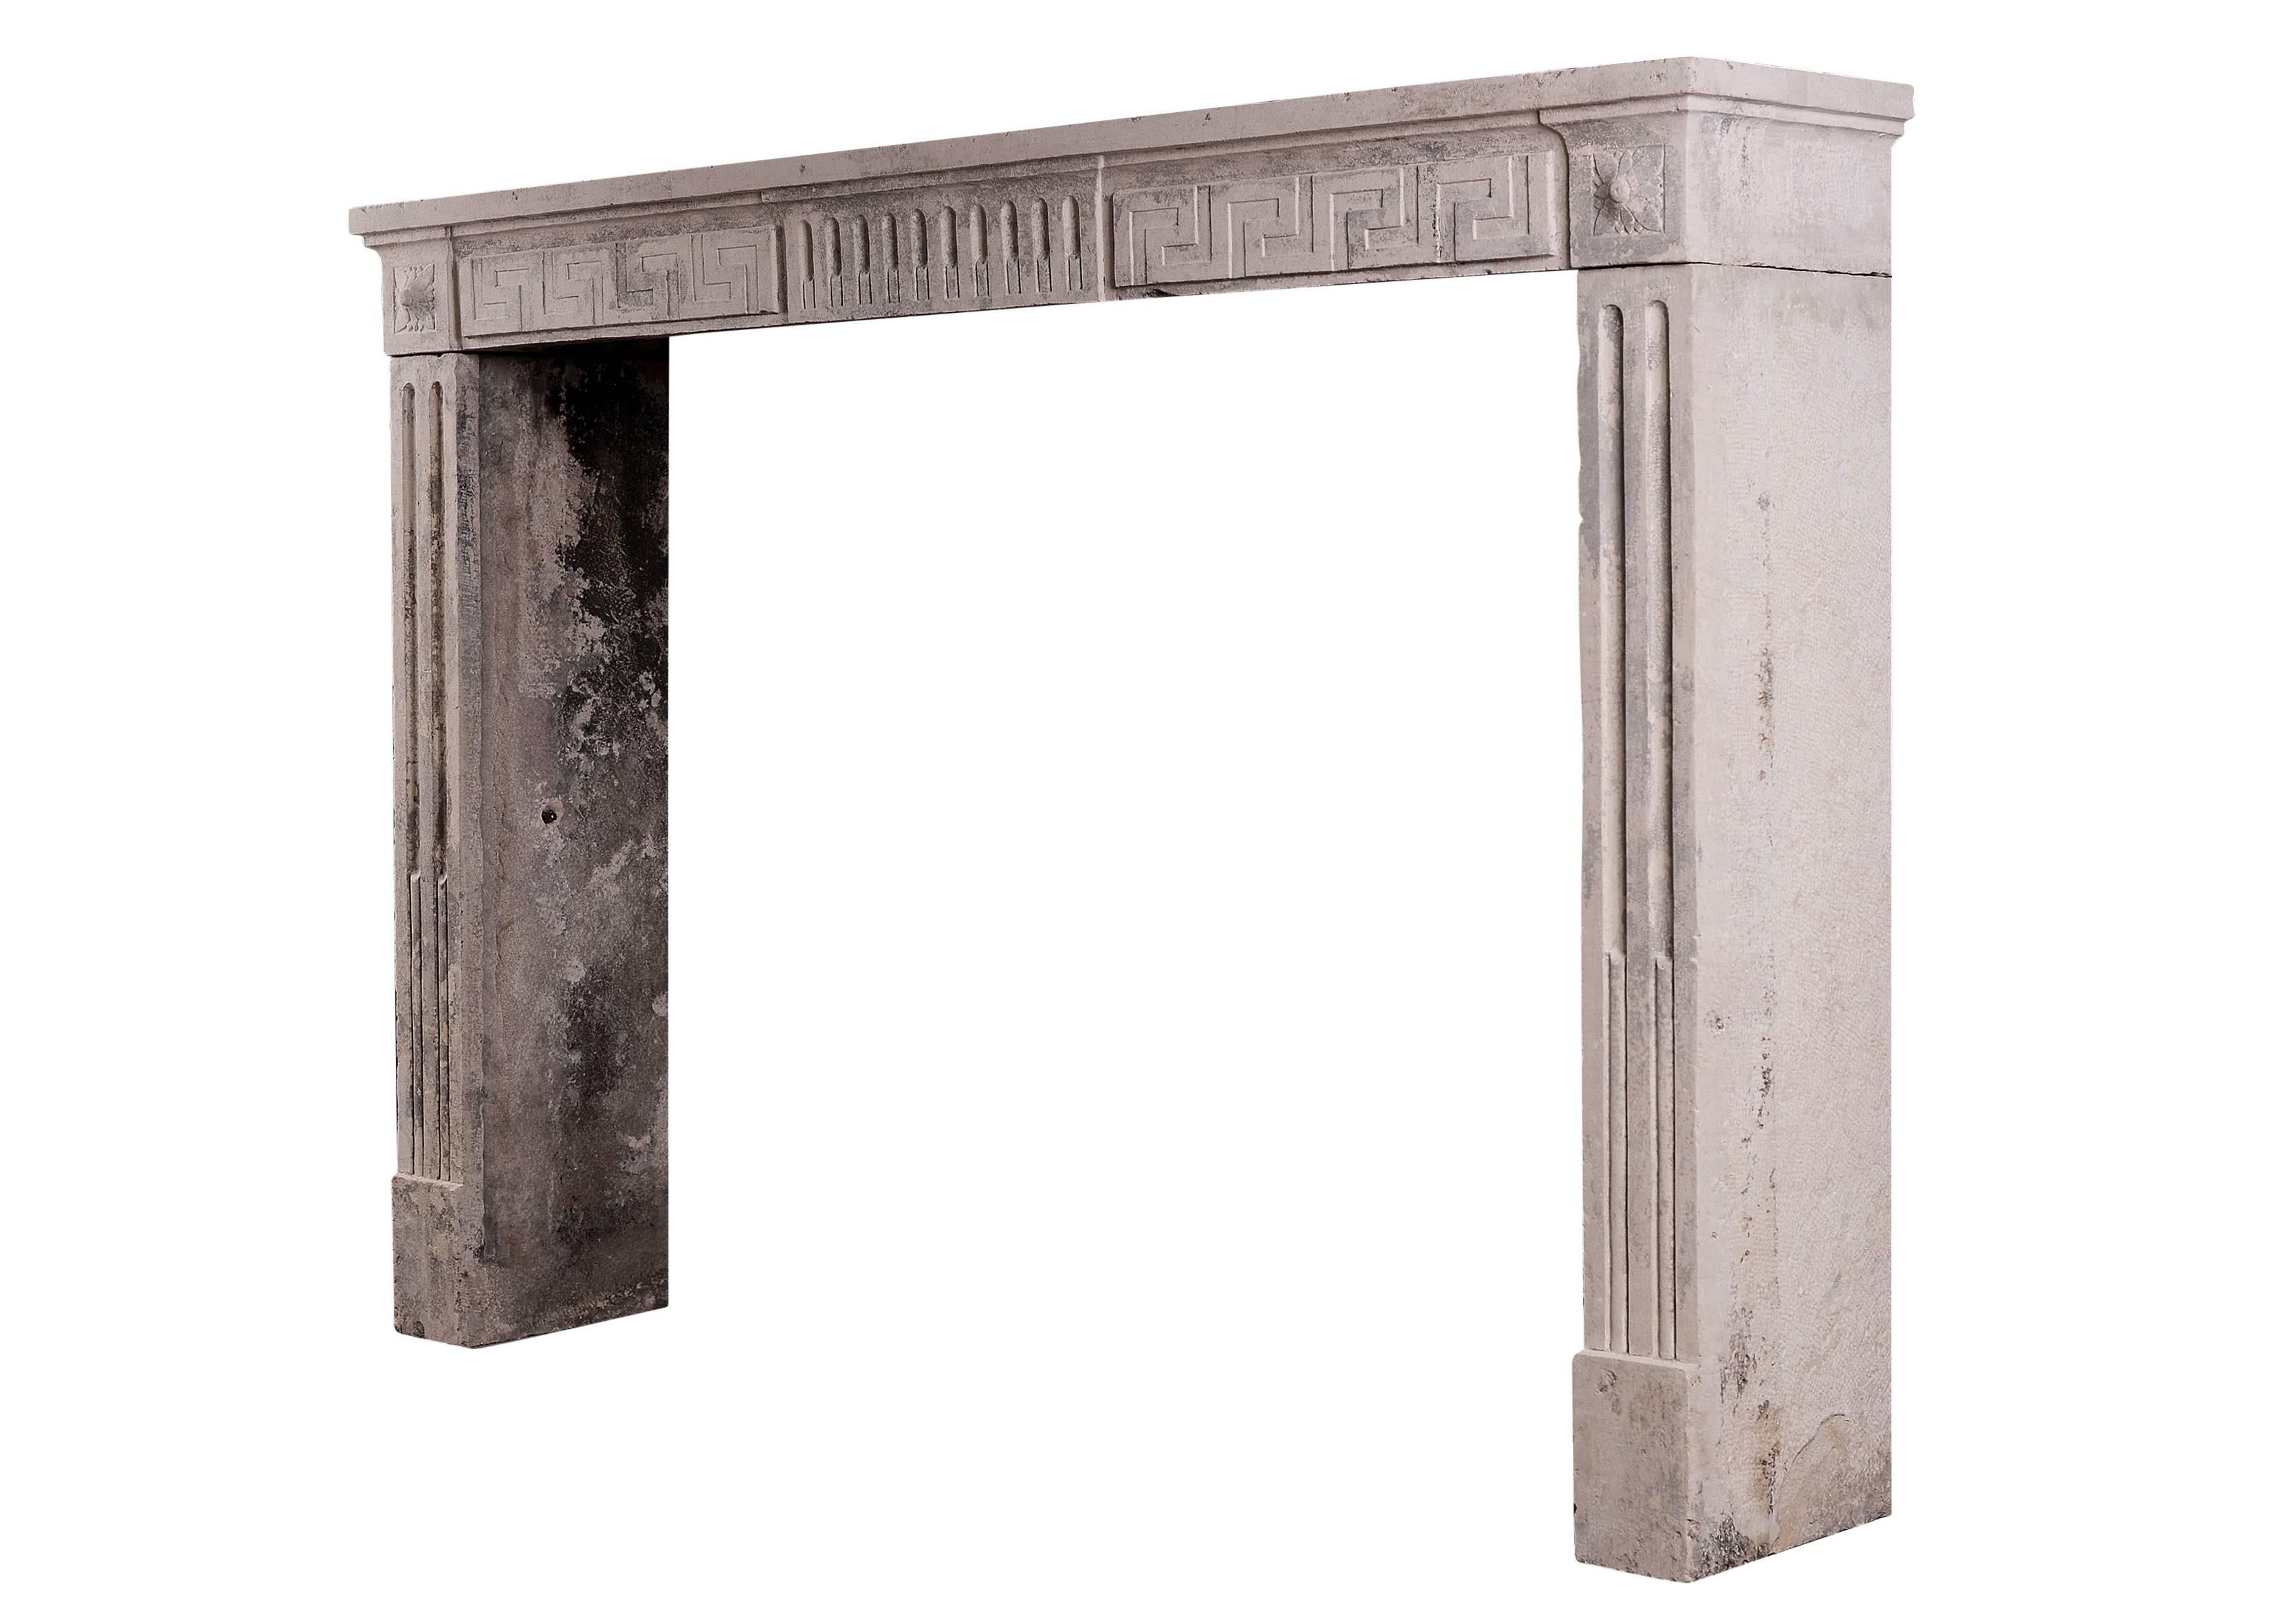 A rustic French period Louis XVI limestone fireplace. The frieze with stop fluting to centre panel and Greek key pattern. The fluted jambs surmounted by square carved paterae. Period 18th century. Some wear and patination consistent with